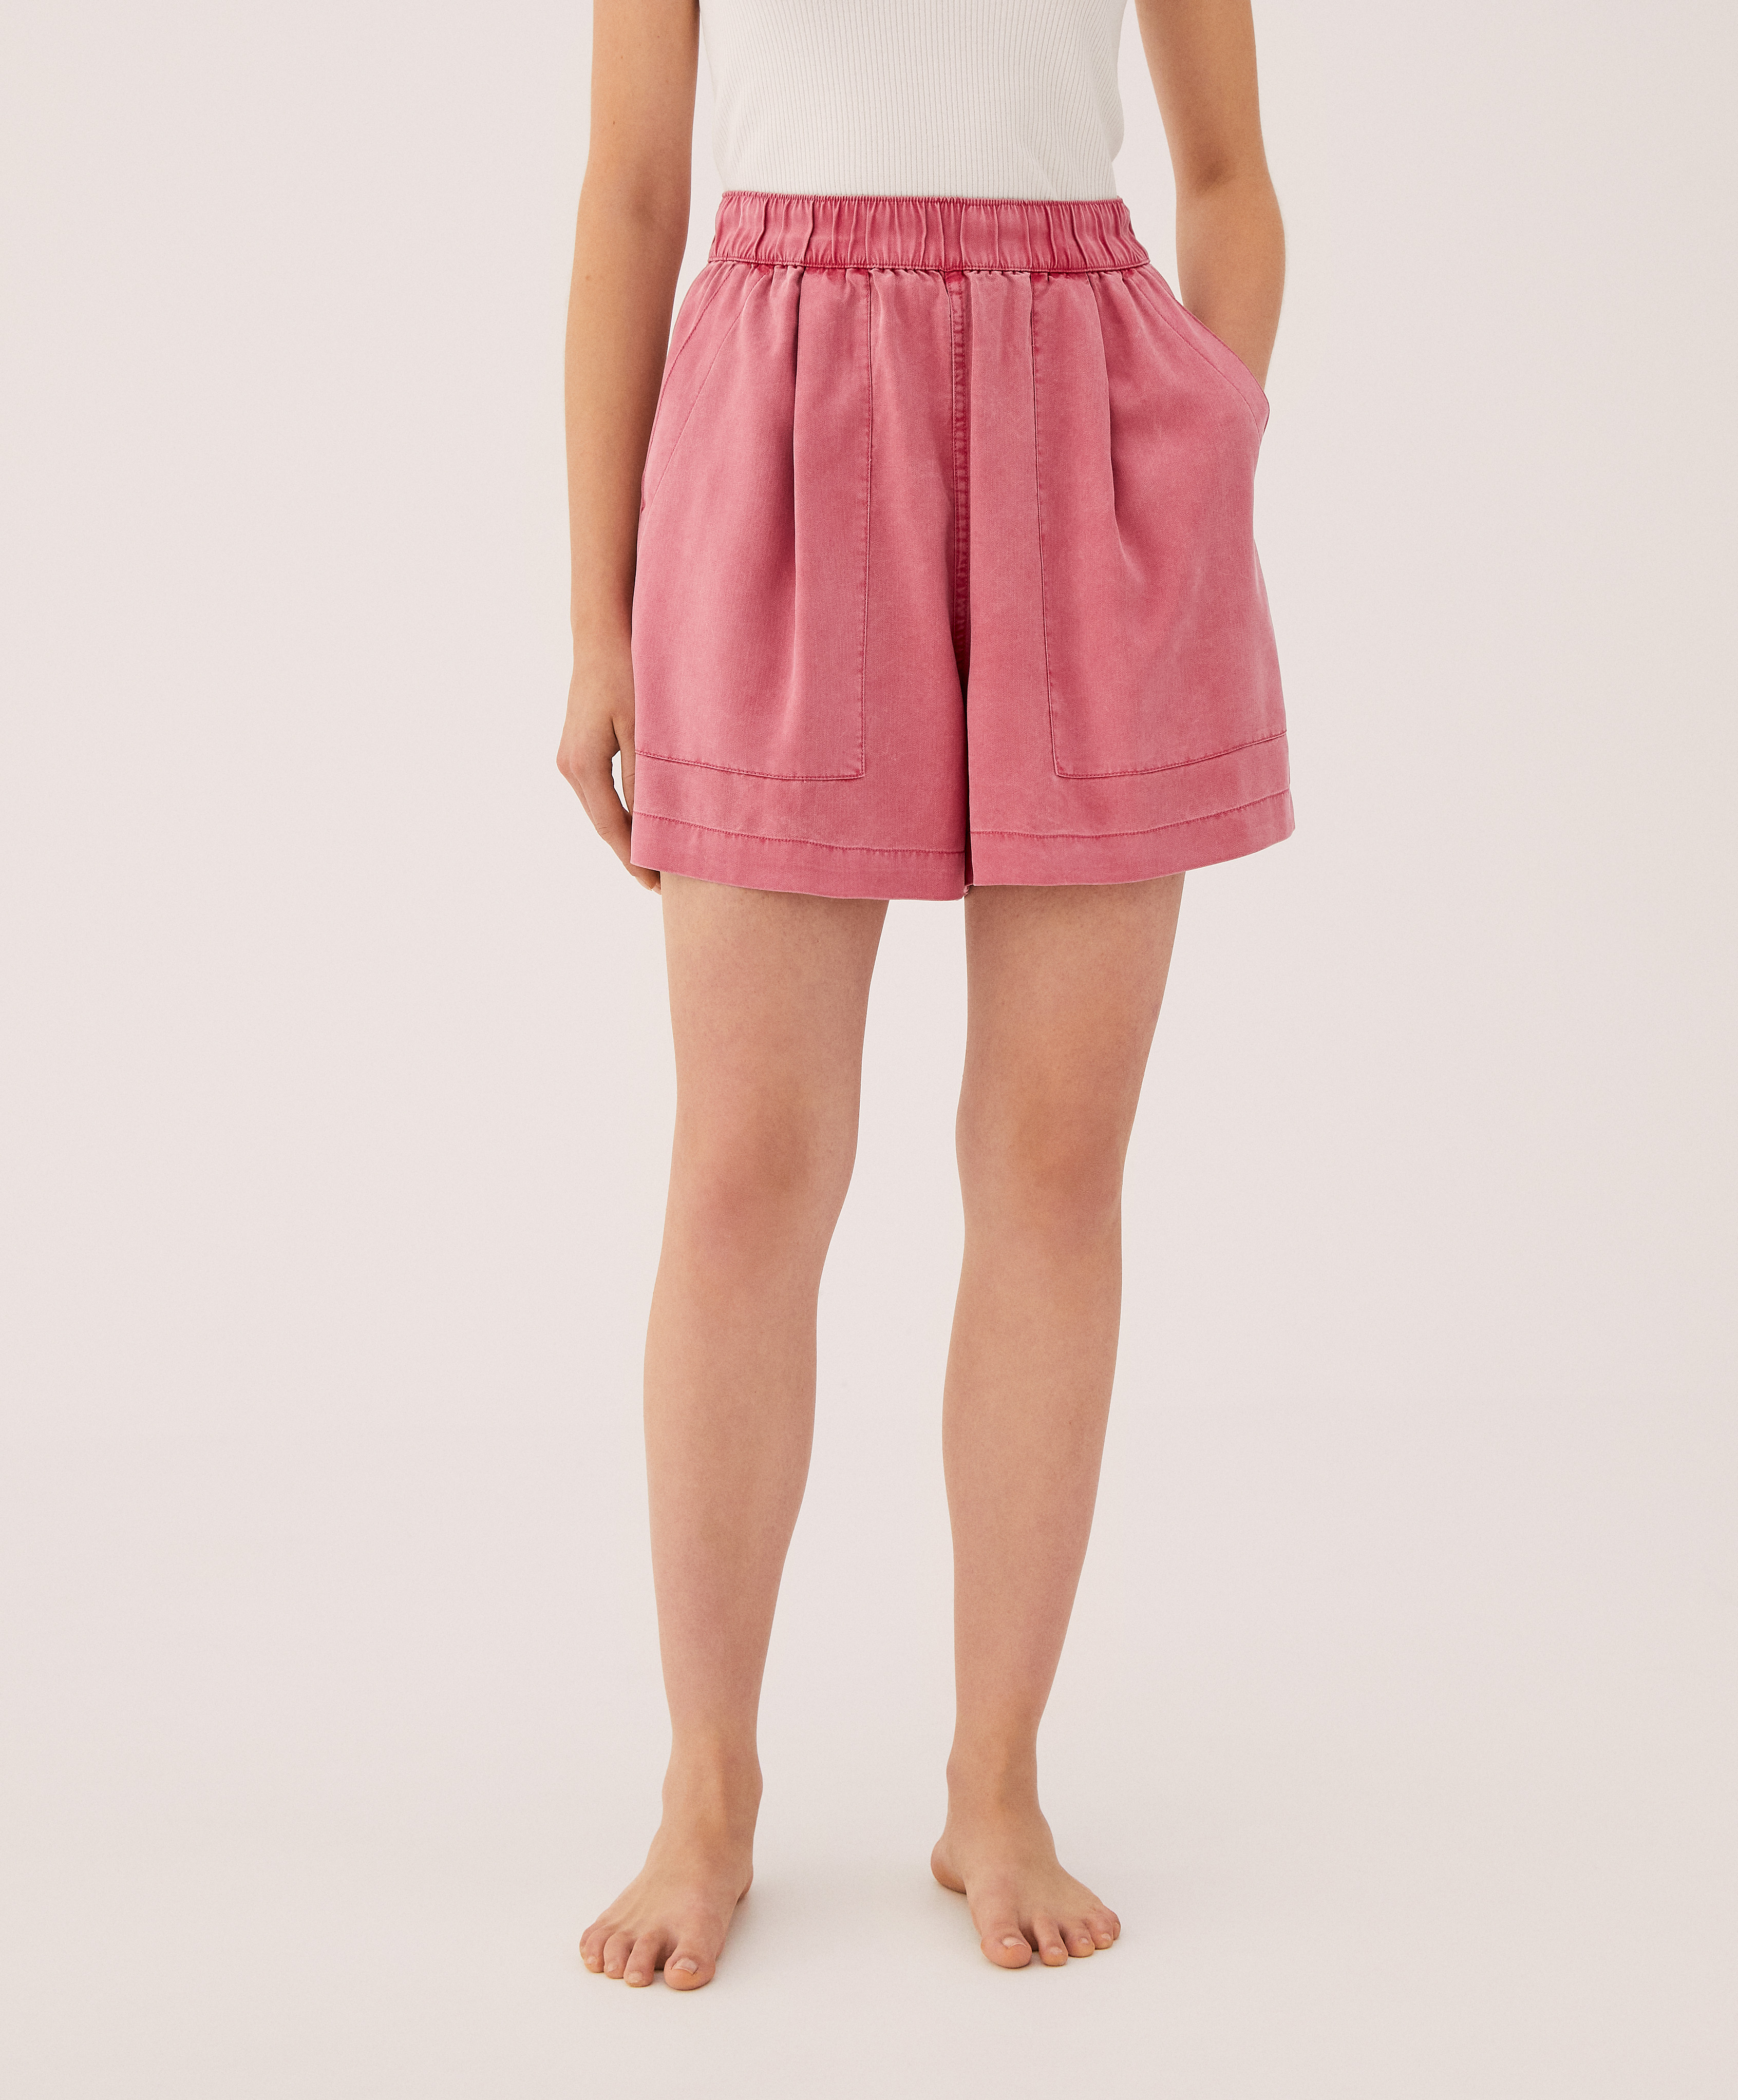 Soft touch lyocell shorts